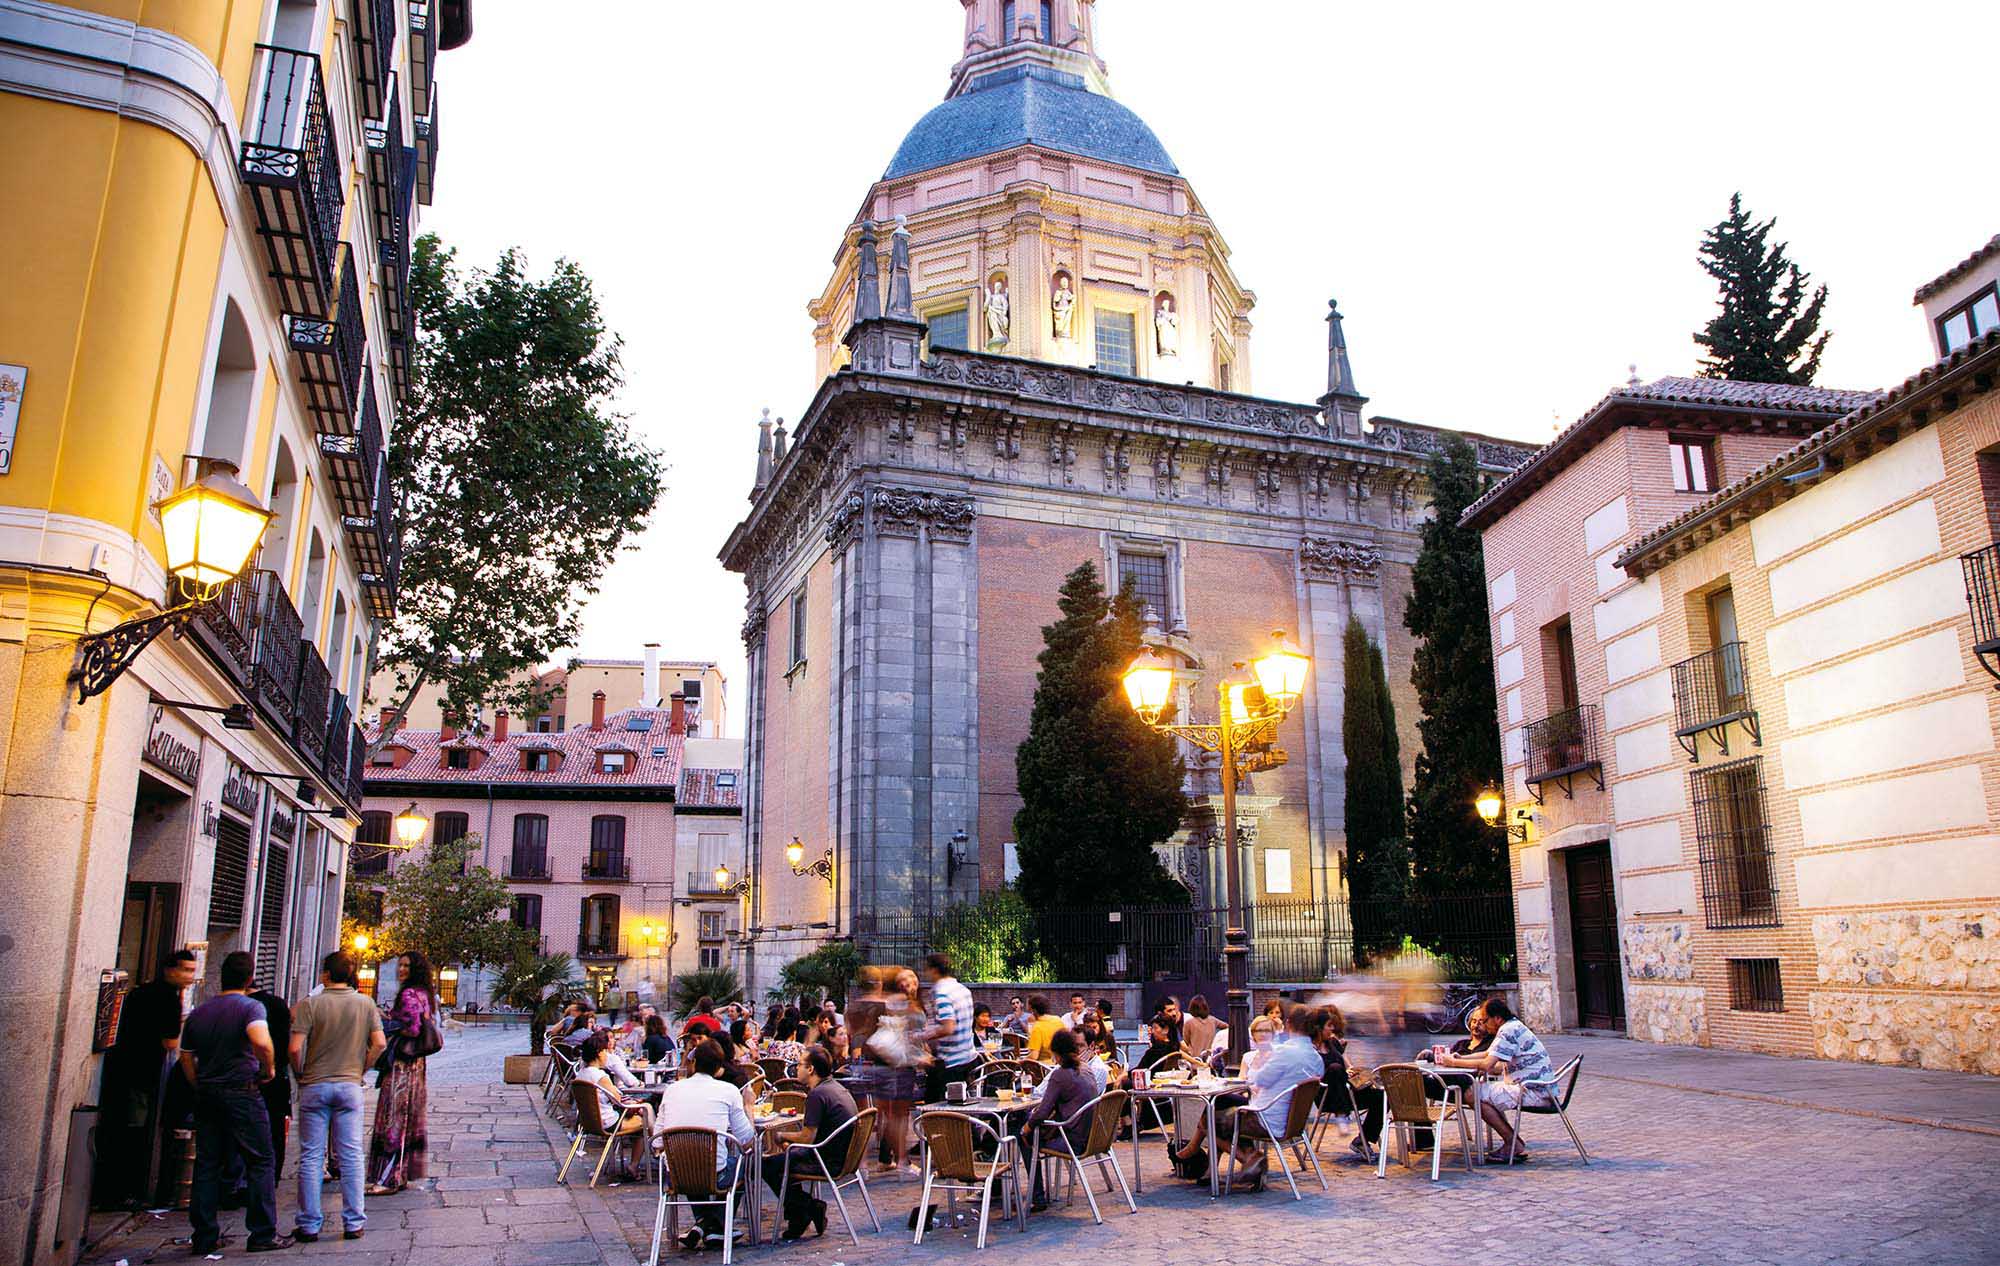 Europe, Spain, Madrid, Plaza San Andres, square, church, restaurant, guests sitting outside, evening, bar, gastronomy, architecture, locals, people,